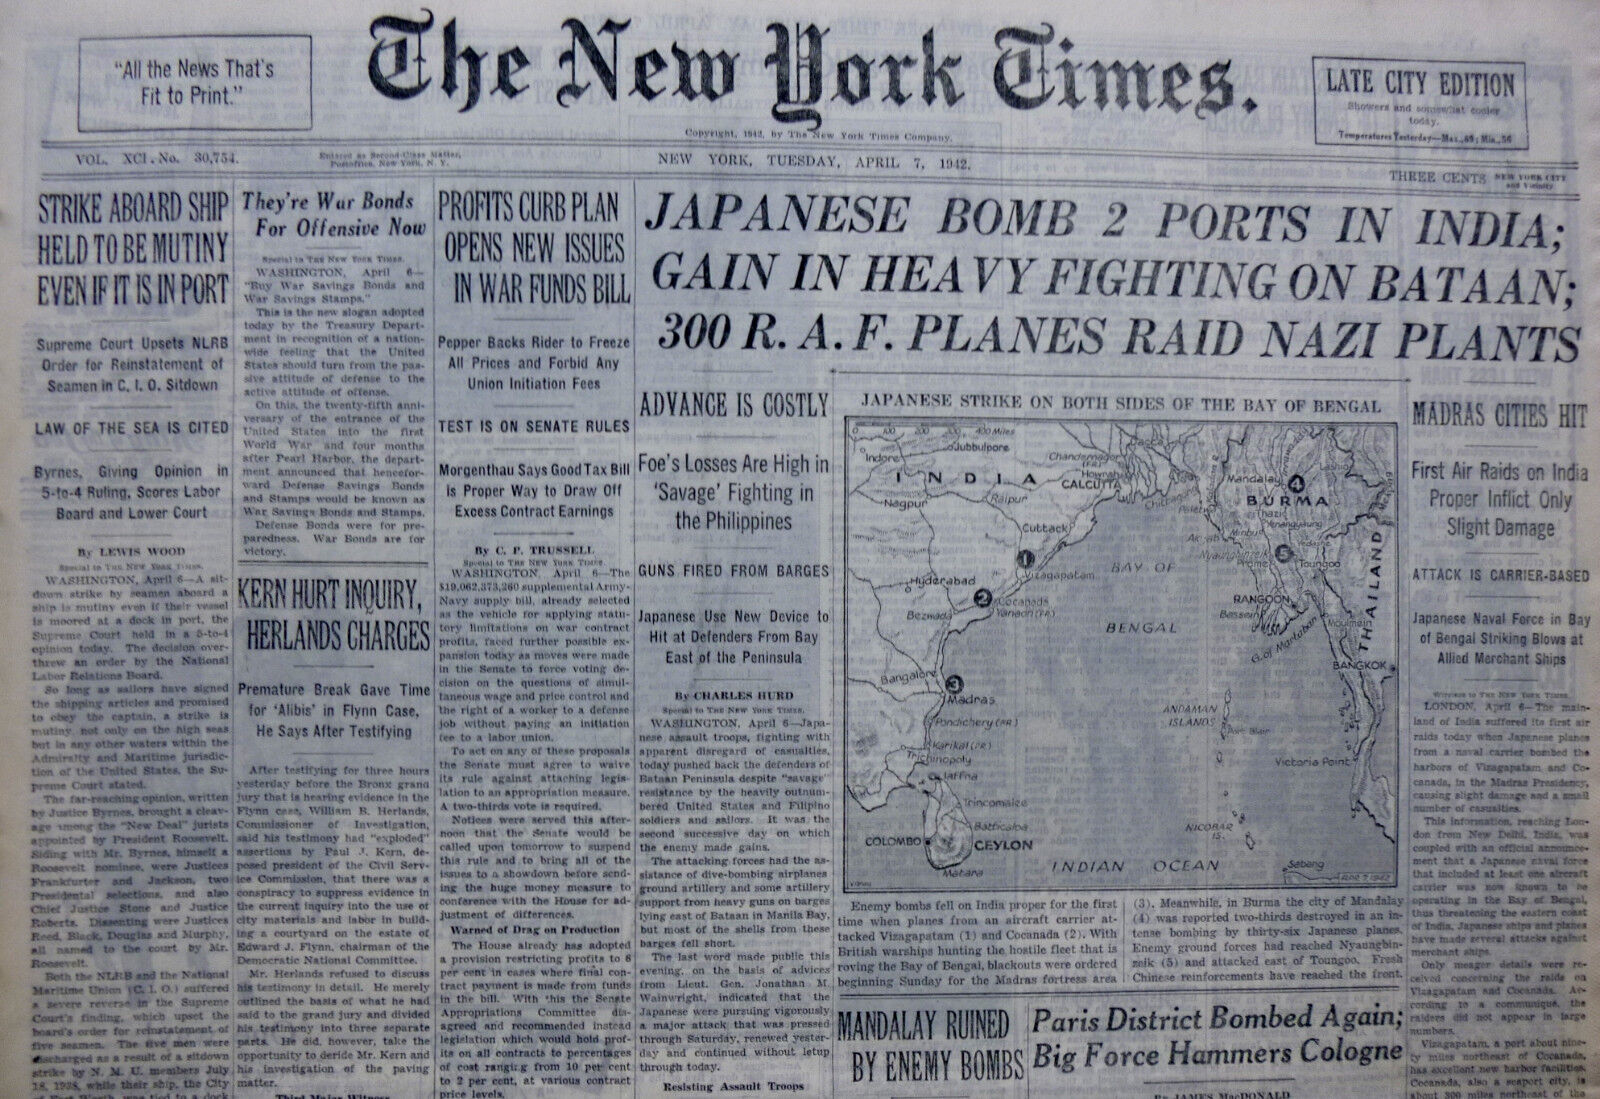 JAPANESE BOMB 2 PORTS IN INDIA MADRAS BATAAN R.A.F. BOMBING 4-1942 WWII April 7